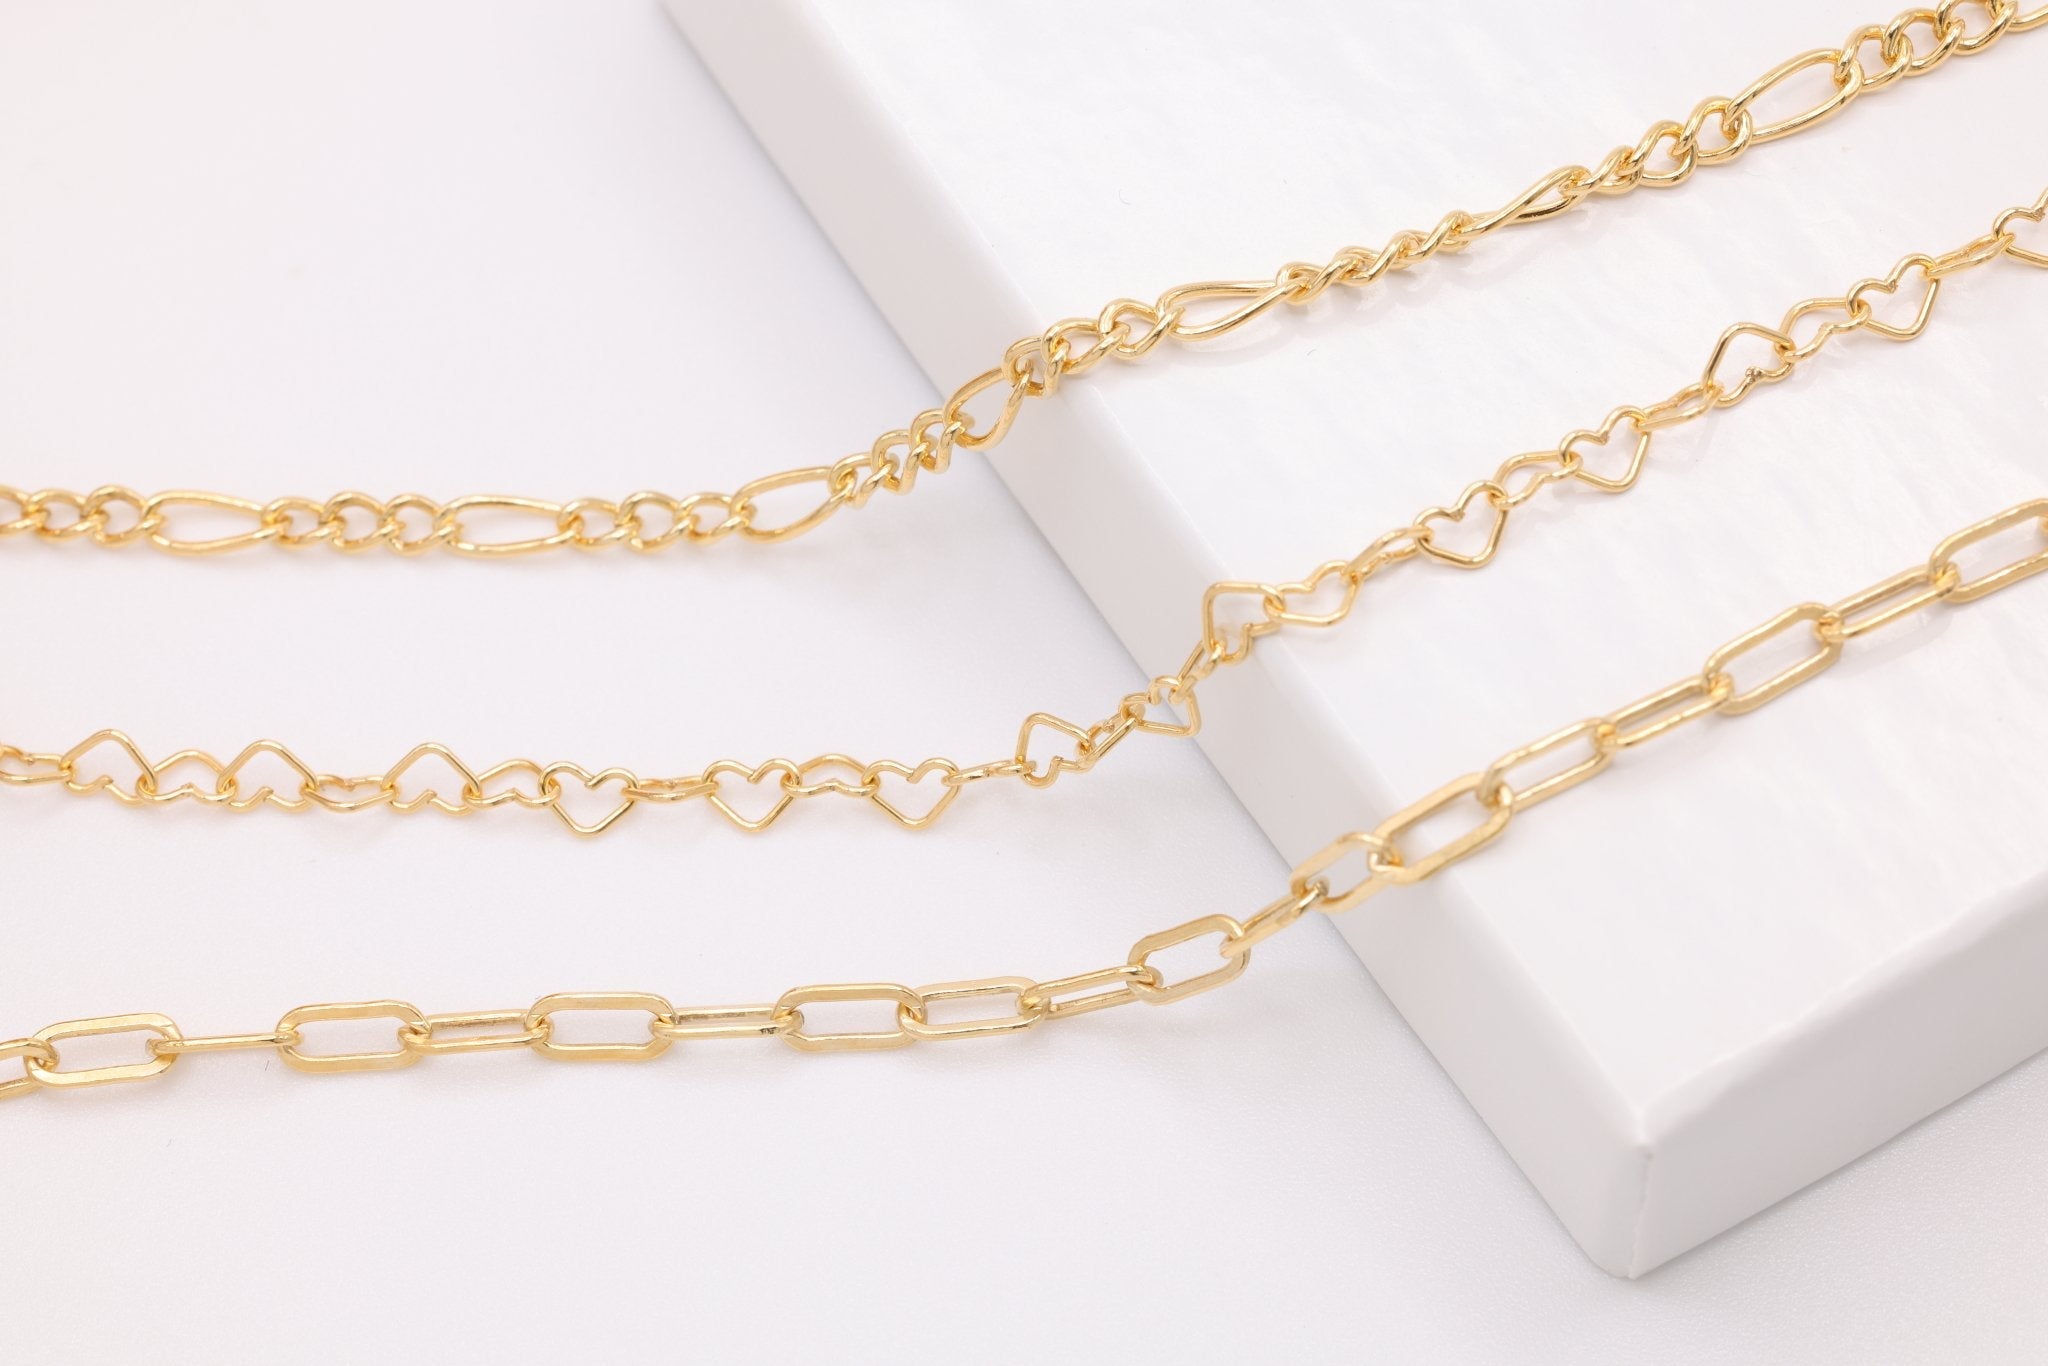 Wholesale Gold-Filled Jewelry Chain - HarperCrown